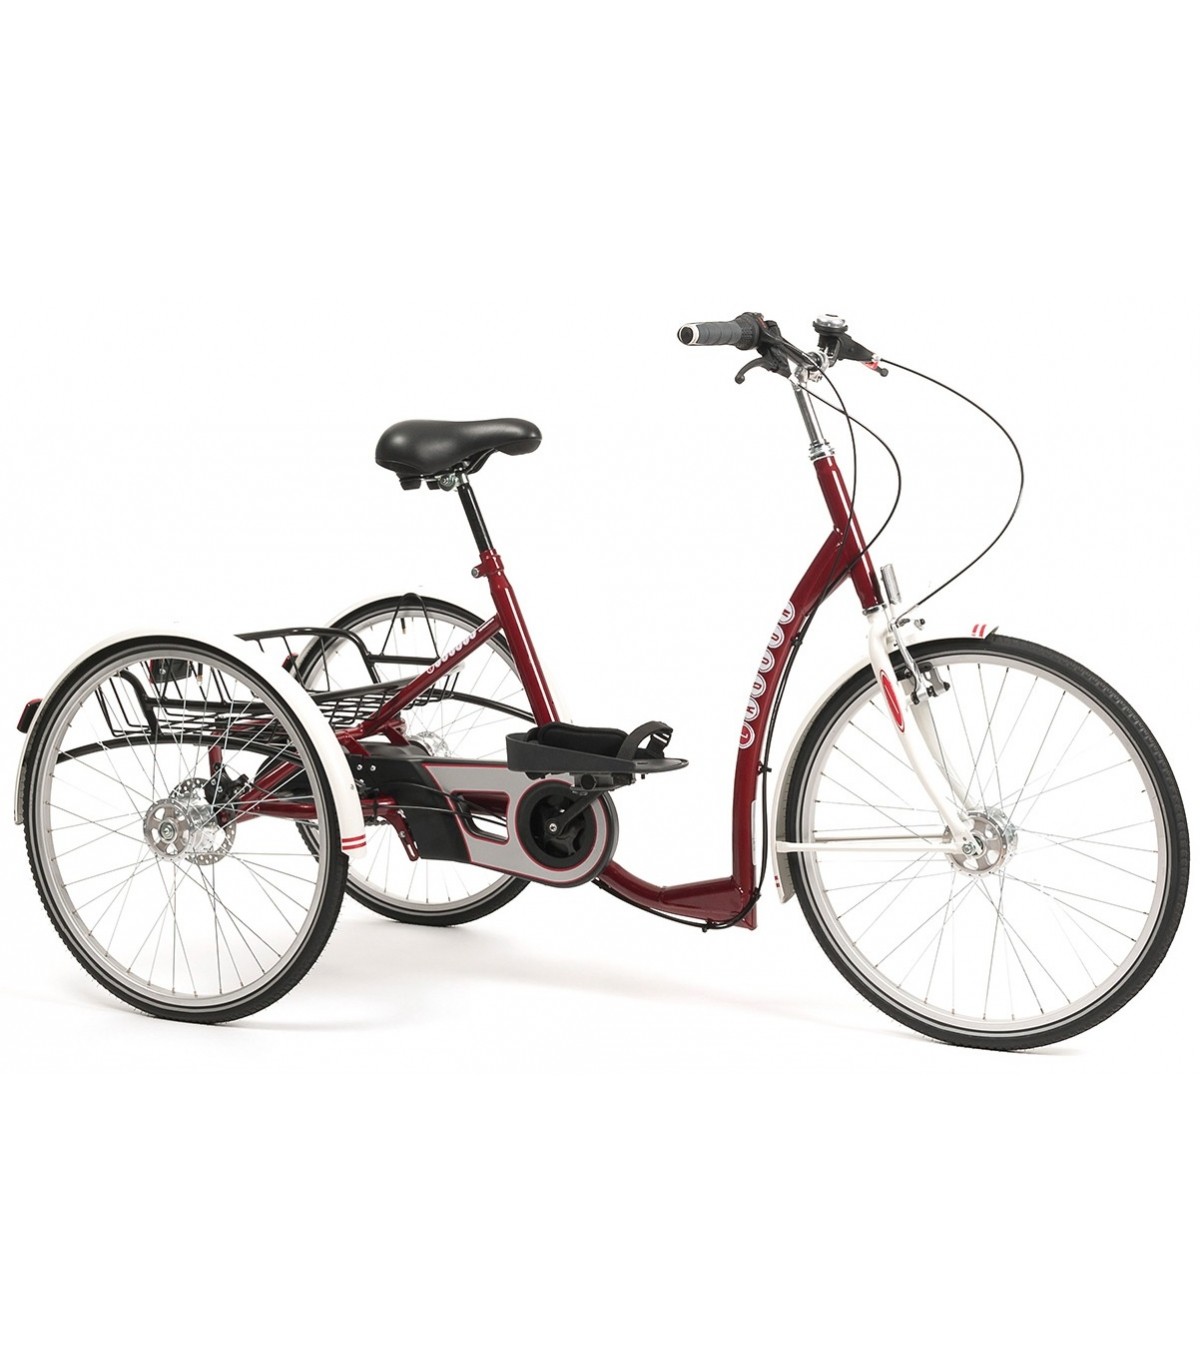 Tricycle Enfant 2215 Sporty